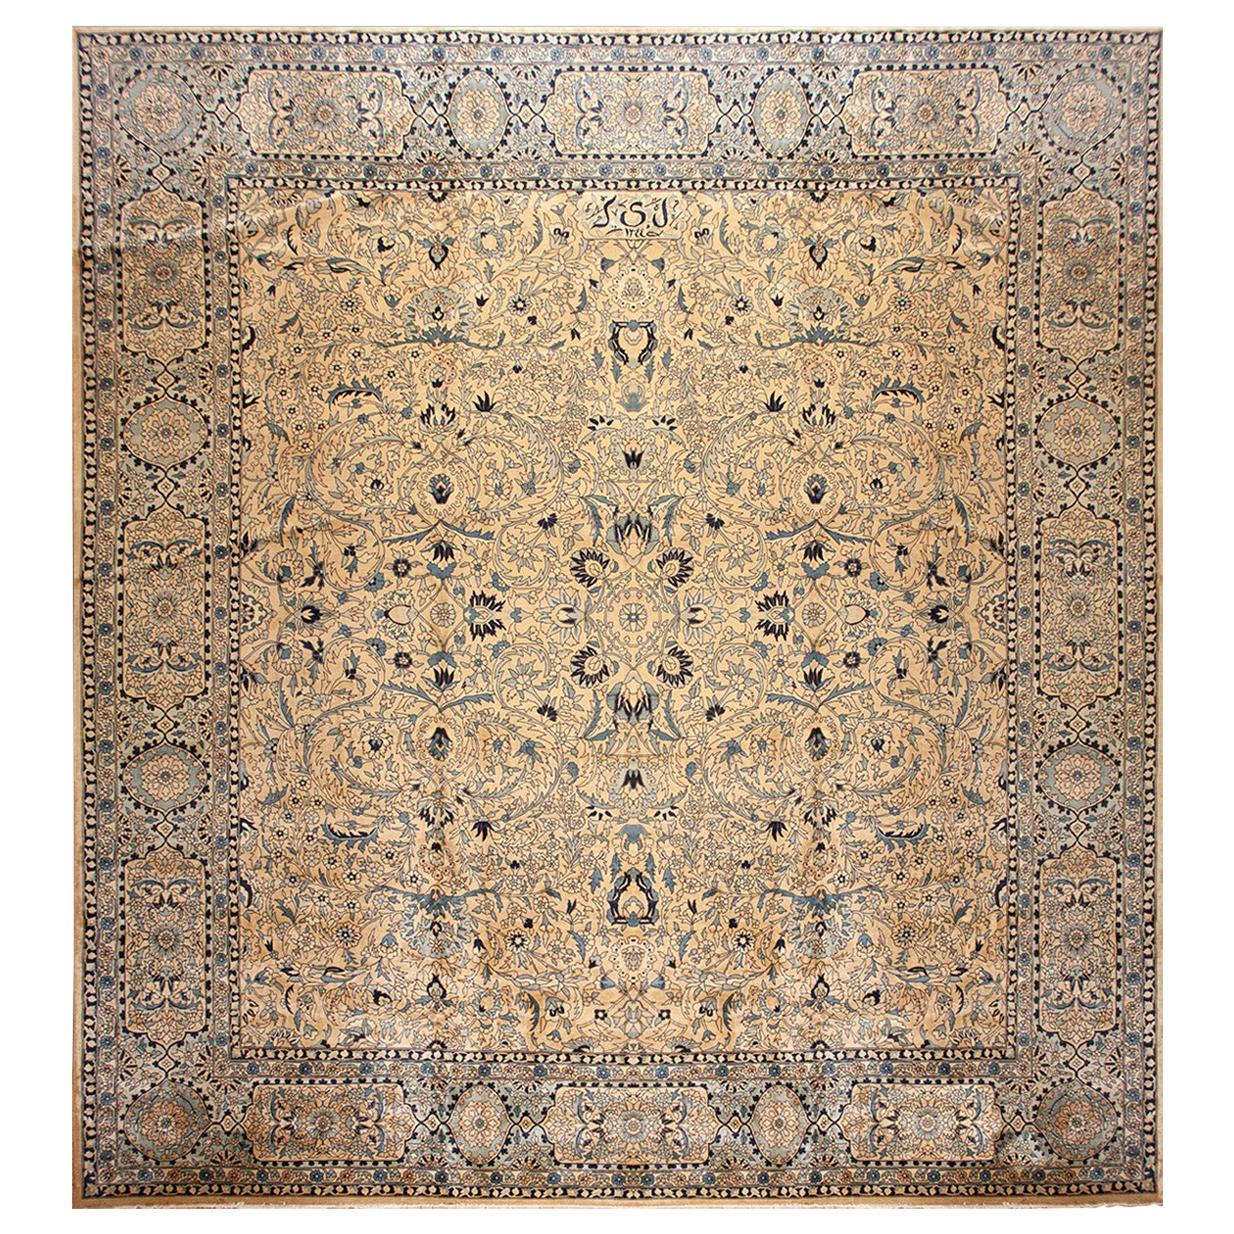 Early 20th Century N. Indian Lahore Carpet ( 16' x 17' - 487 x 518 ) For Sale